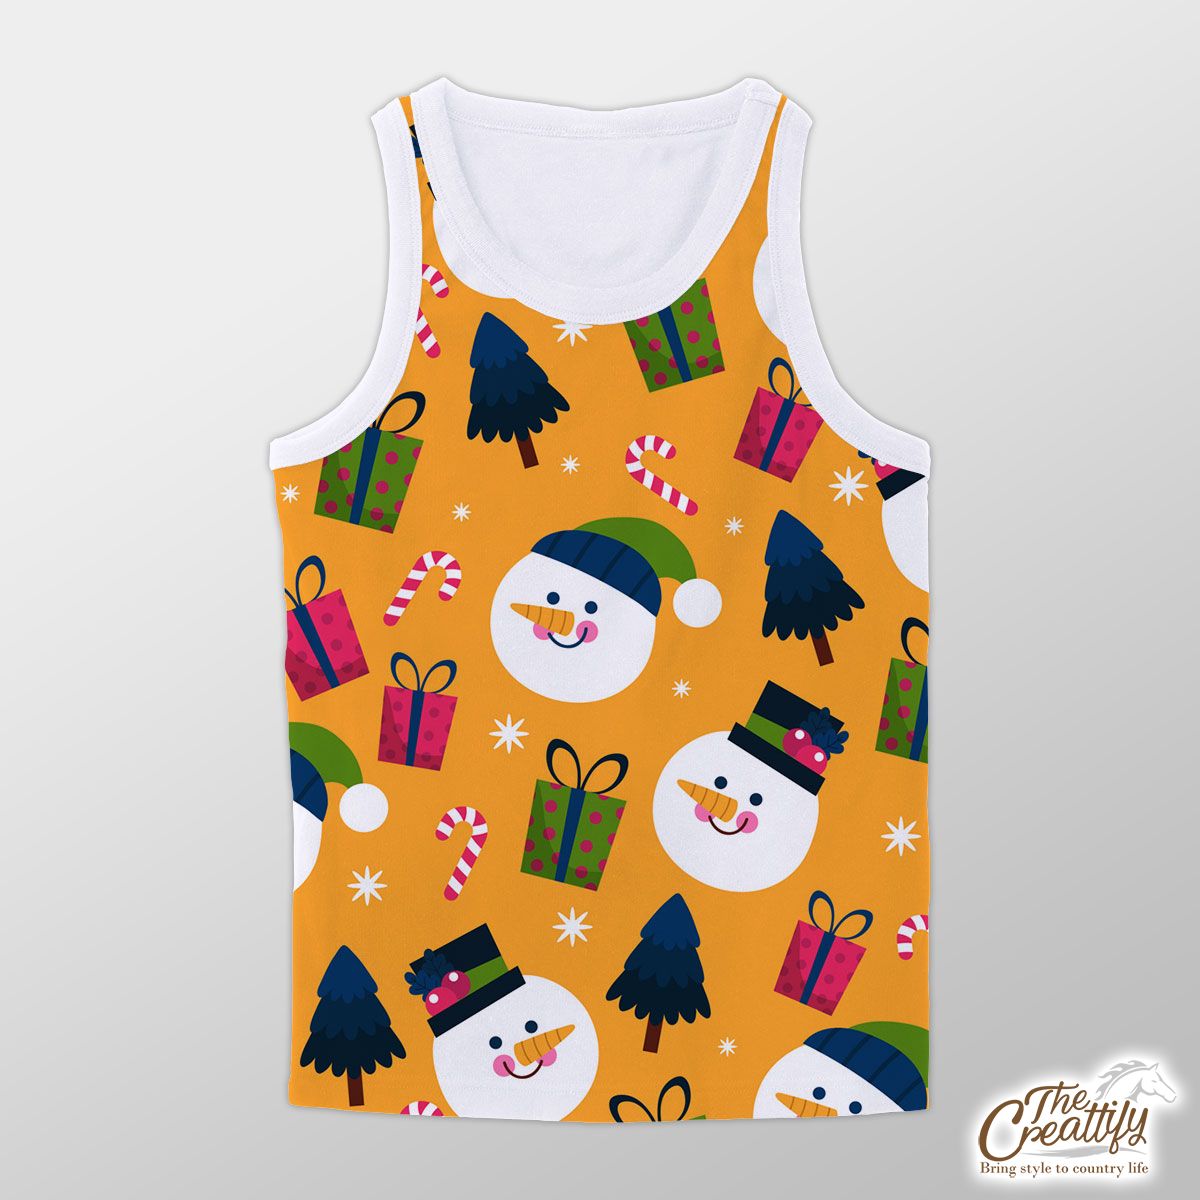 Snowman Face With Christmas Presents Unisex Tank Top